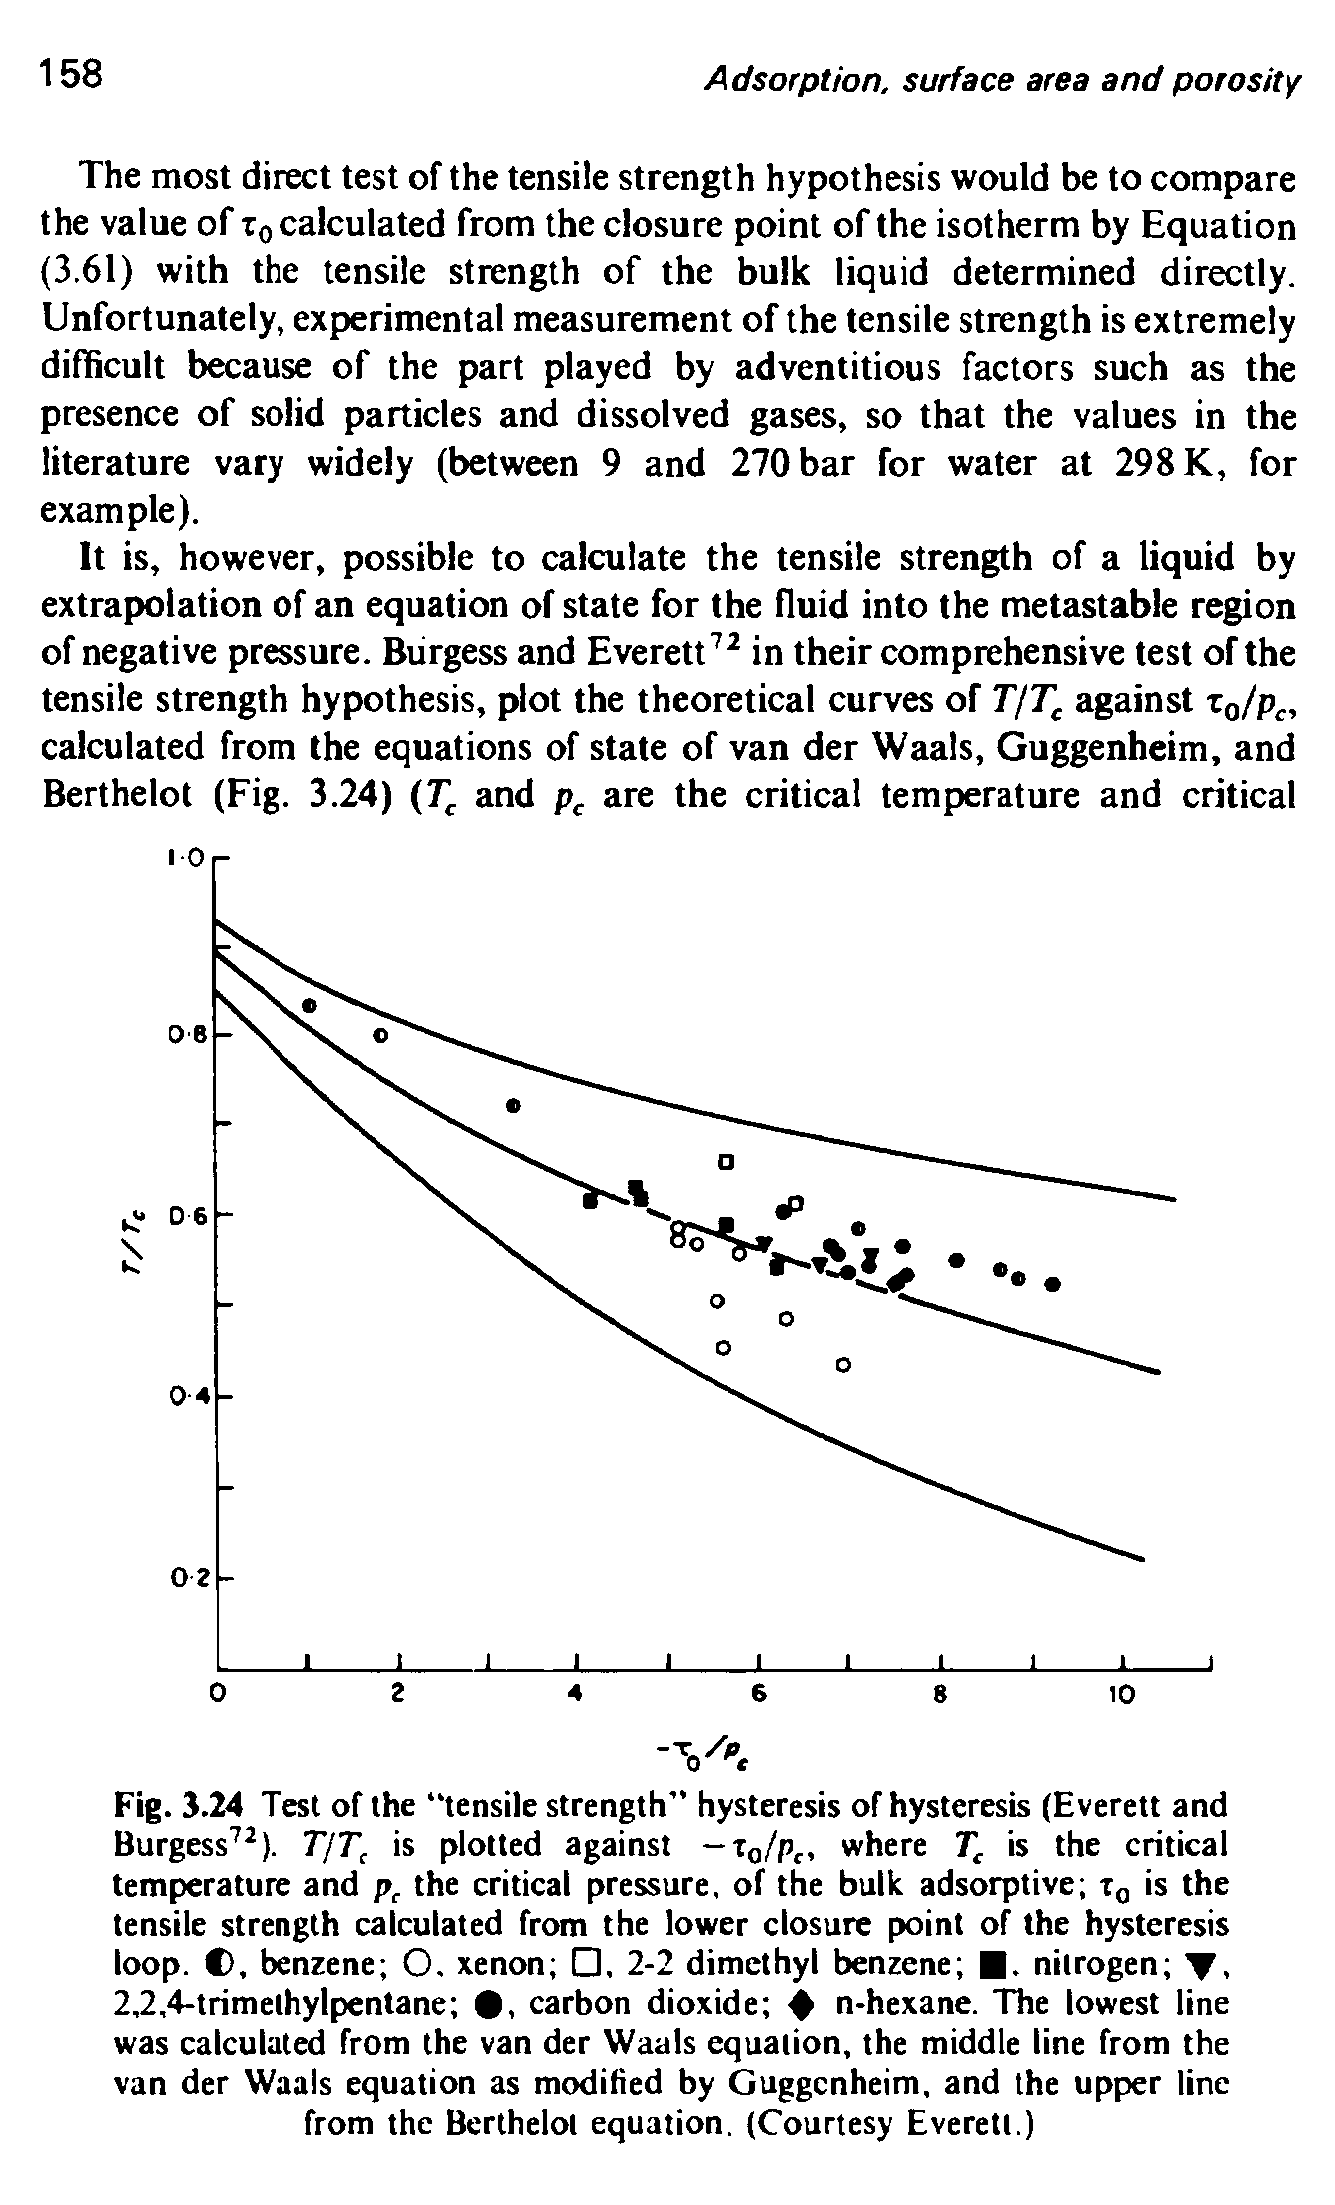 Fig. 3.24 Test of the tensile strength hysteresis of hysteresis (Everett and Burgess ). TjT, is plotted against — Tq/Po where is the critical temperature and p.. the critical pressure, of the bulk adsorptive Tq is the tensile strength calculated from the lower closure point of the hysteresis loop. C), benzene O. xenon , 2-2 dimethyl benzene . nitrogen , 2,2,4-trimethylpentane , carbon dioxide 4 n-hexane. The lowest line was calculated from the van der Waals equation, the middle line from the van der Waals equation as modified by Guggenheim, and the upper line from the Berthelot equation. (Courtesy Everett.)...